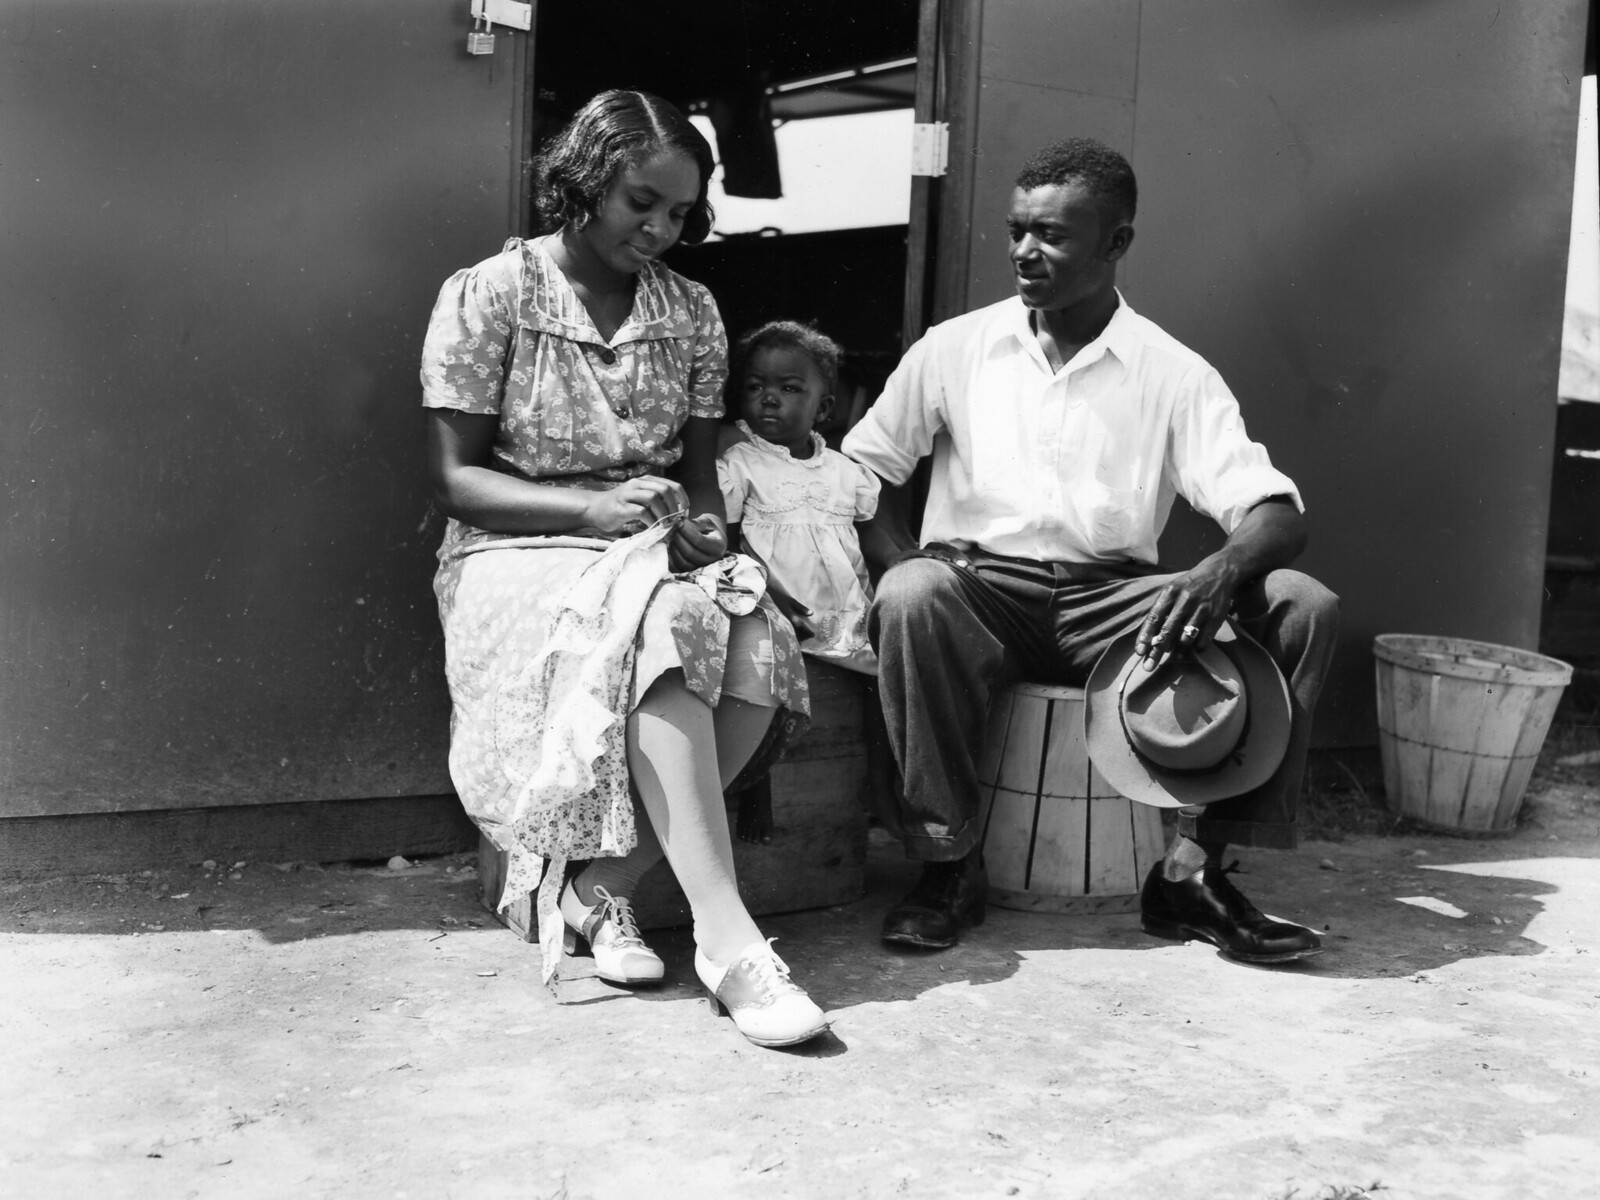 Councilman and family on the stoop of their house